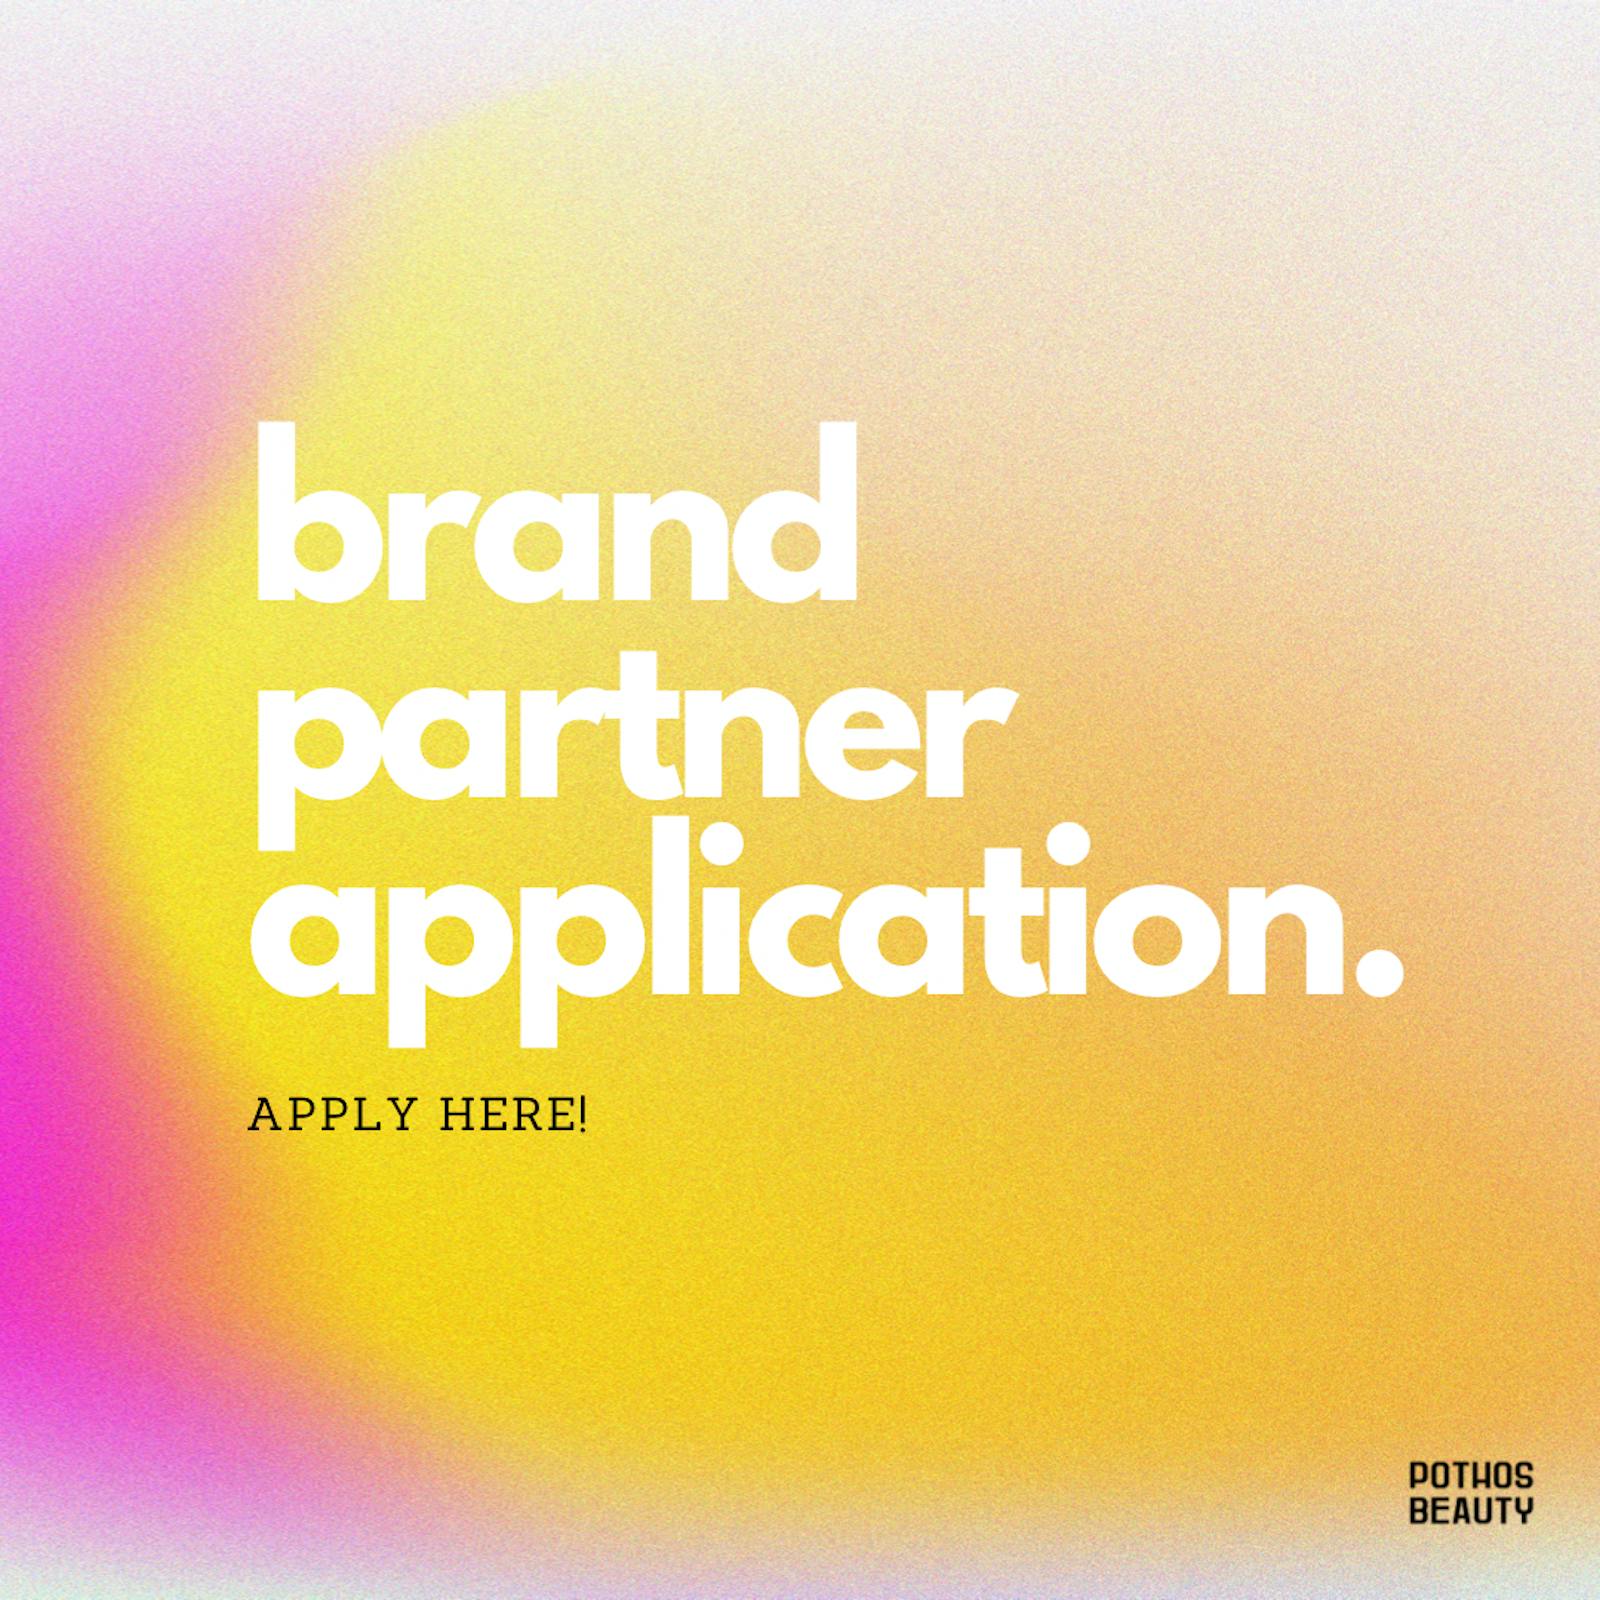 Want to be a Brand Partner?